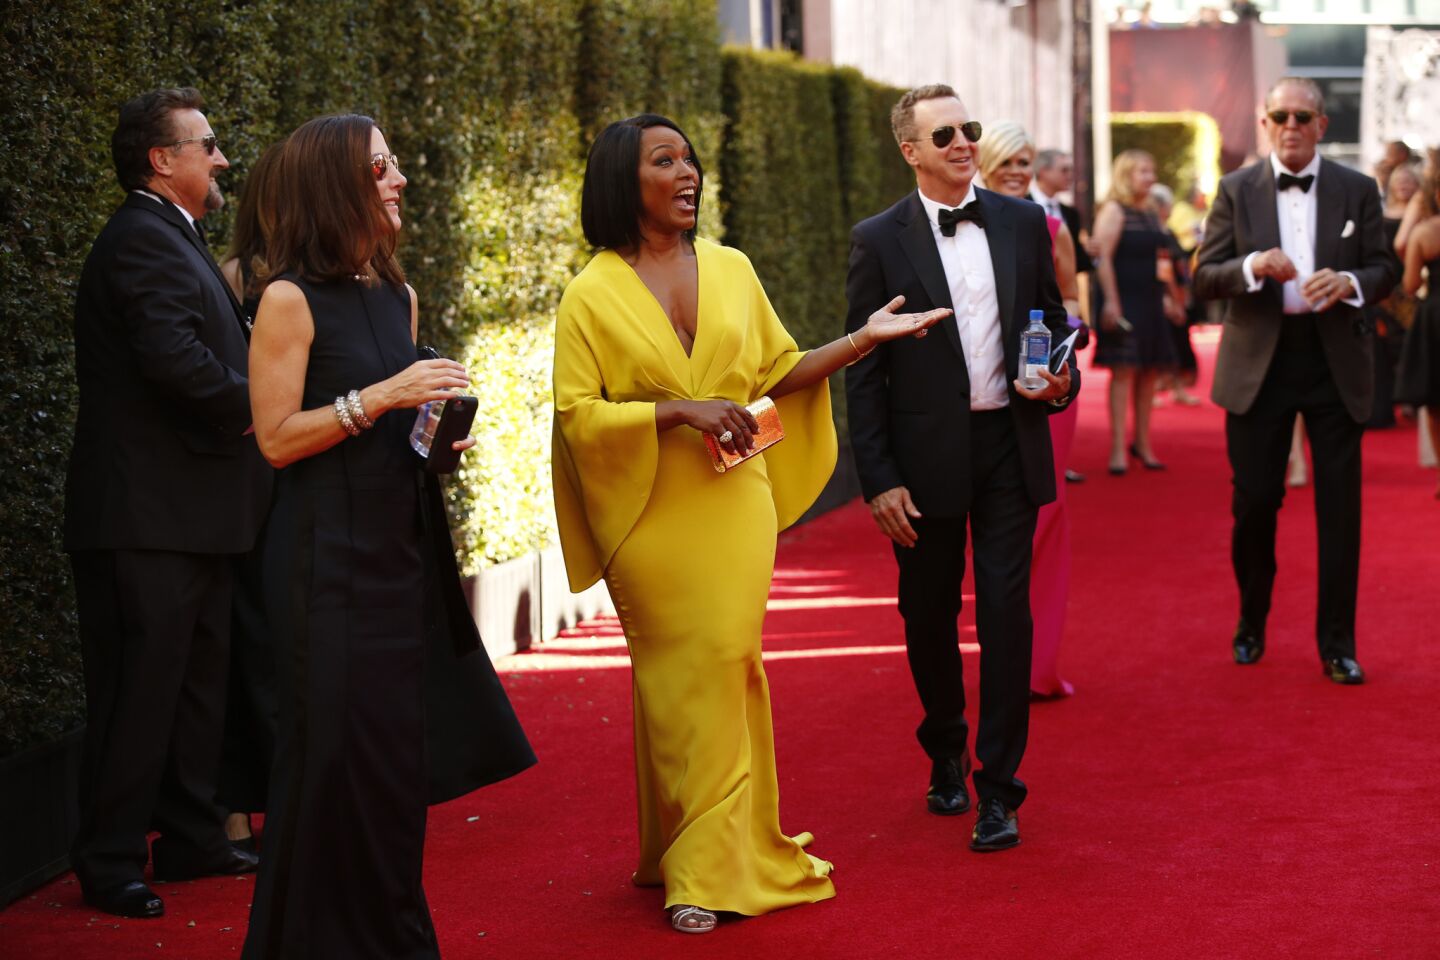 Emmys 2016: Candid photos from the red carpet